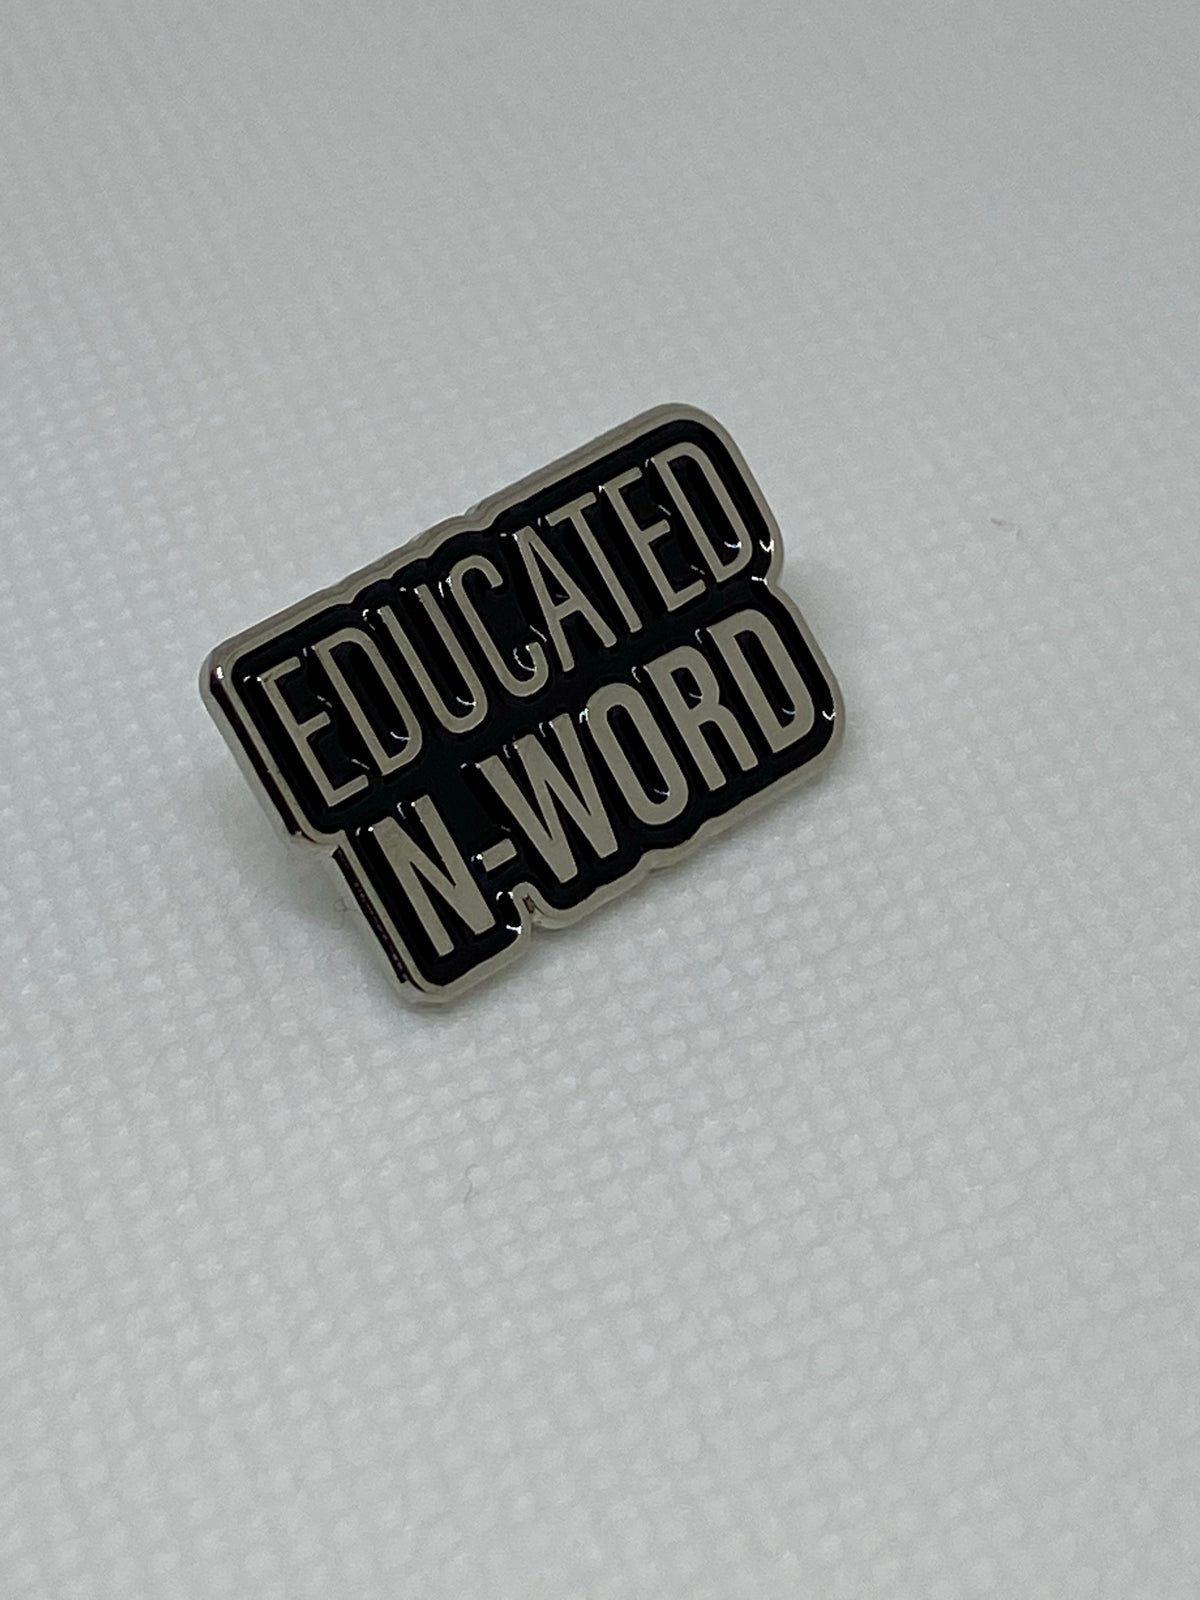 Load image into Gallery viewer, Educated N-word Lapel Pin
